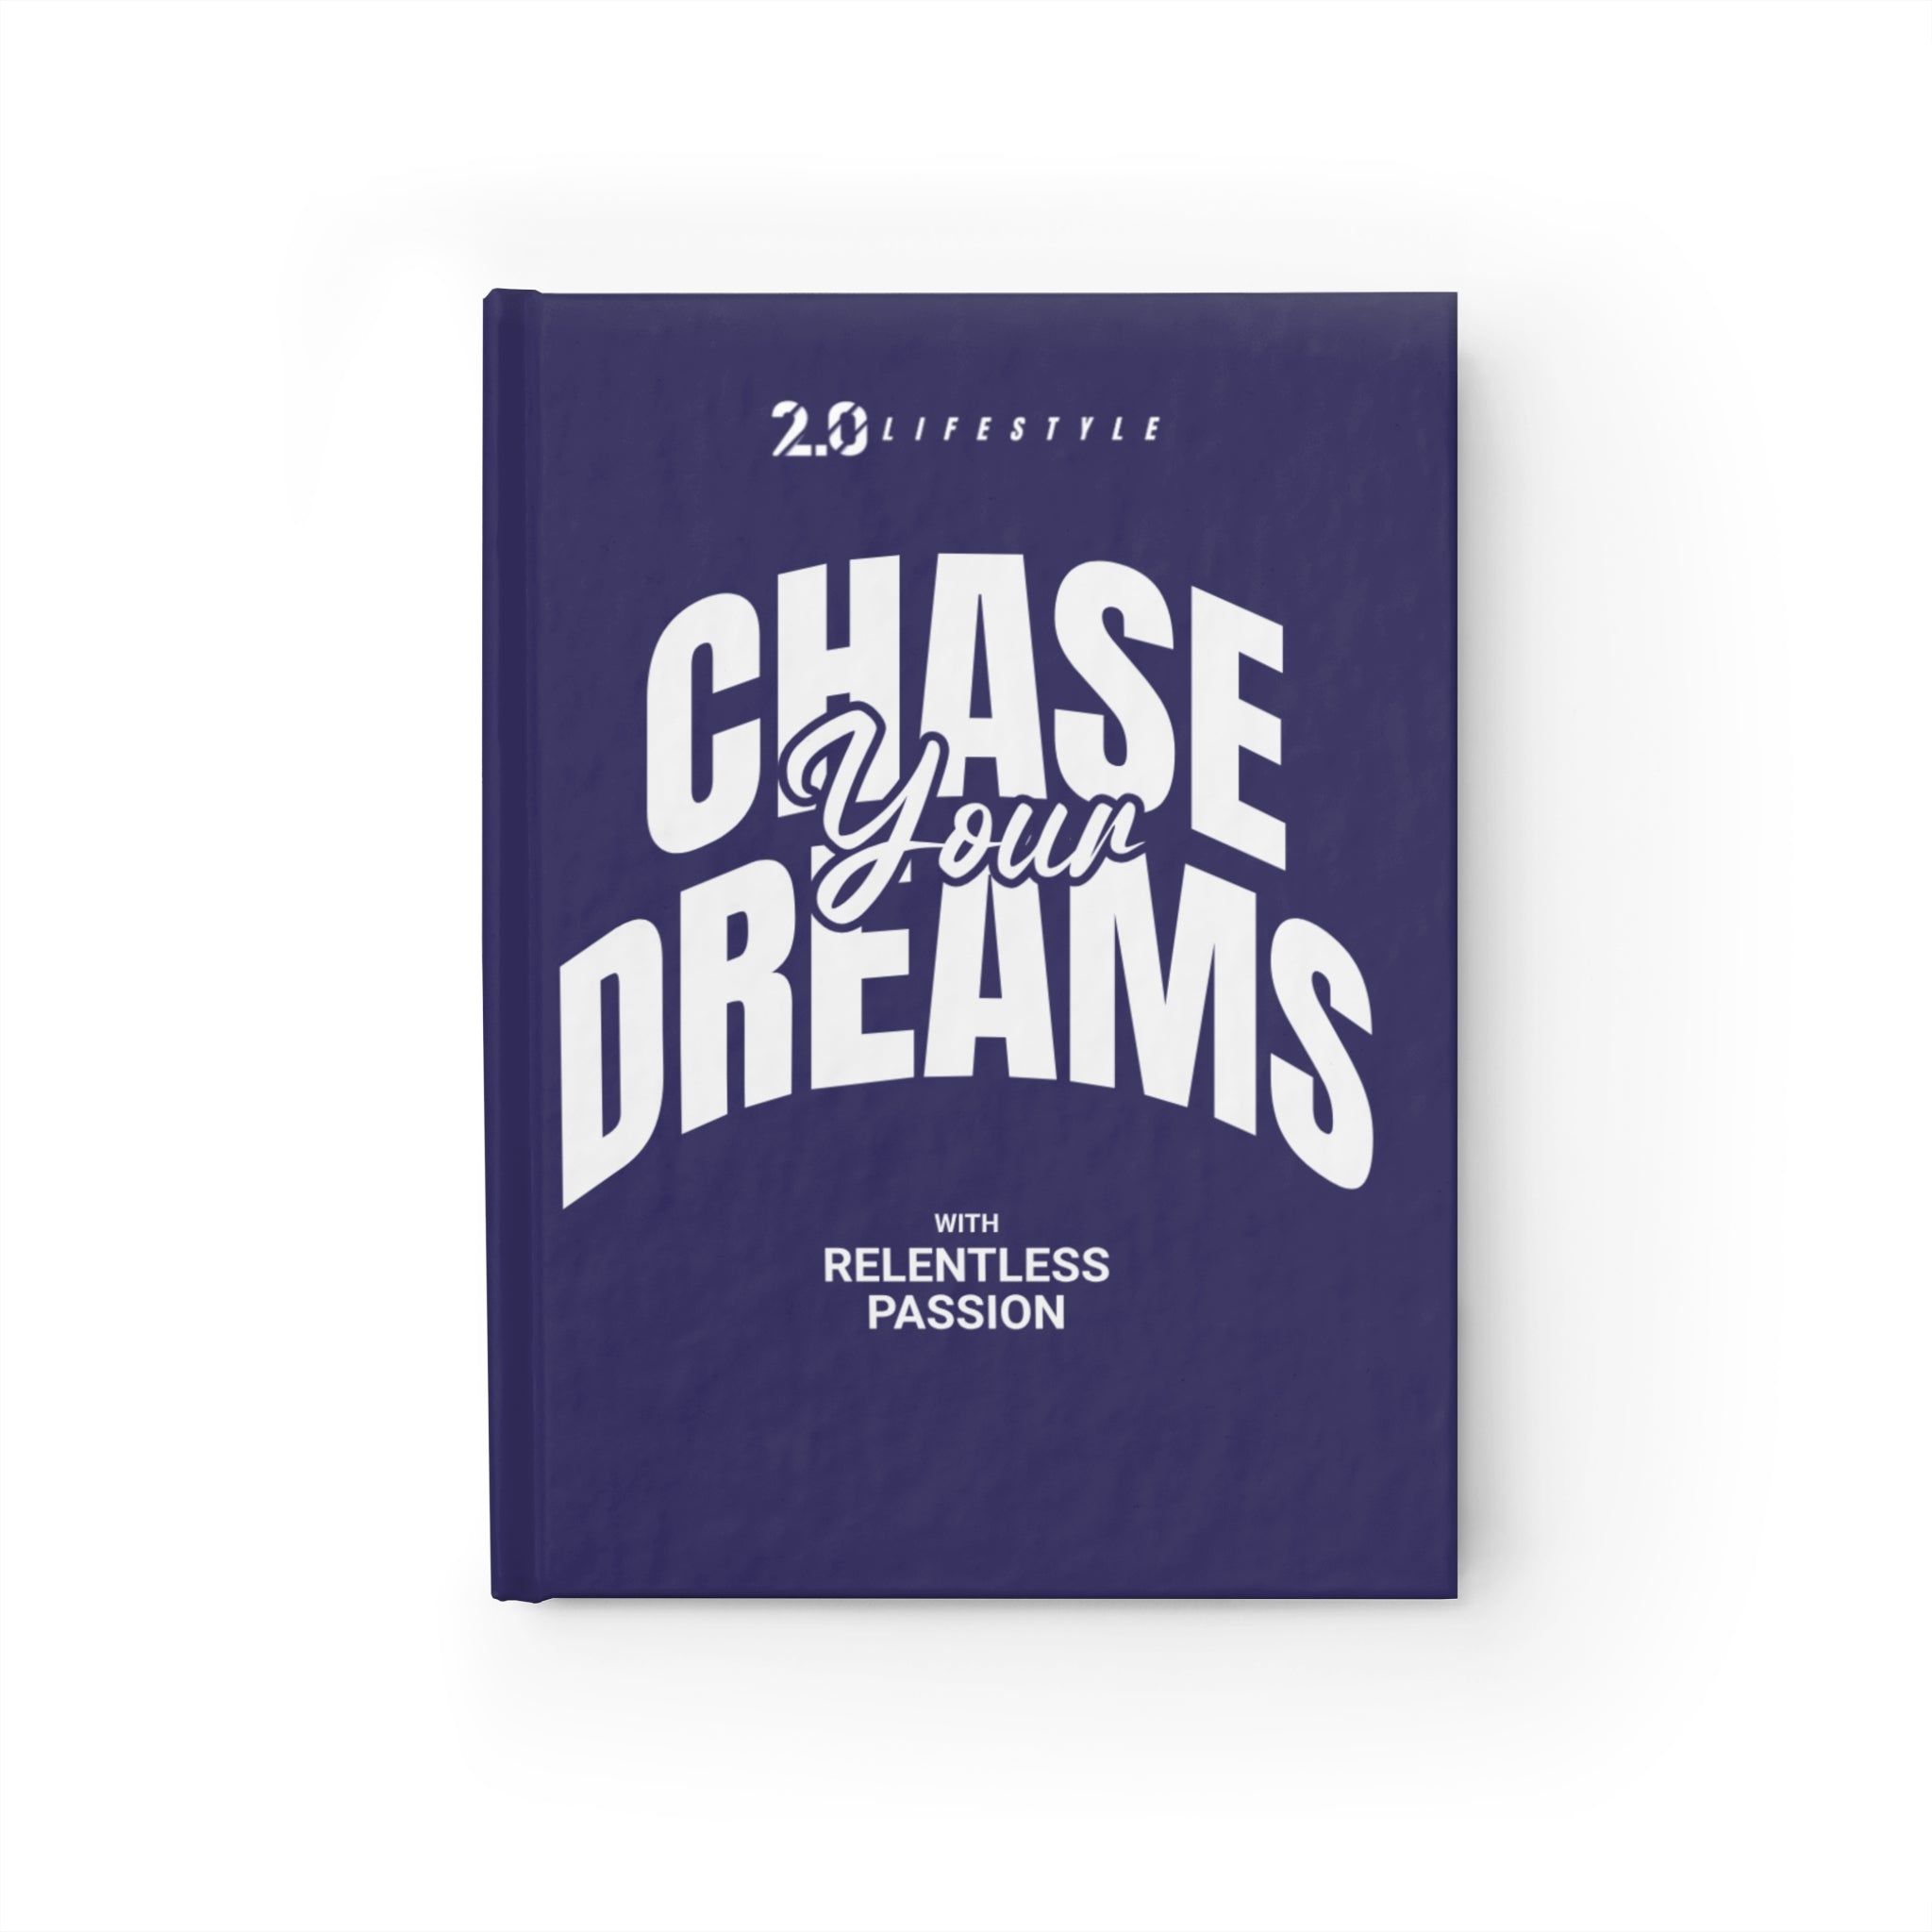 Chasing Dreams Journal - Ruled Line - 2.0 Lifestyle